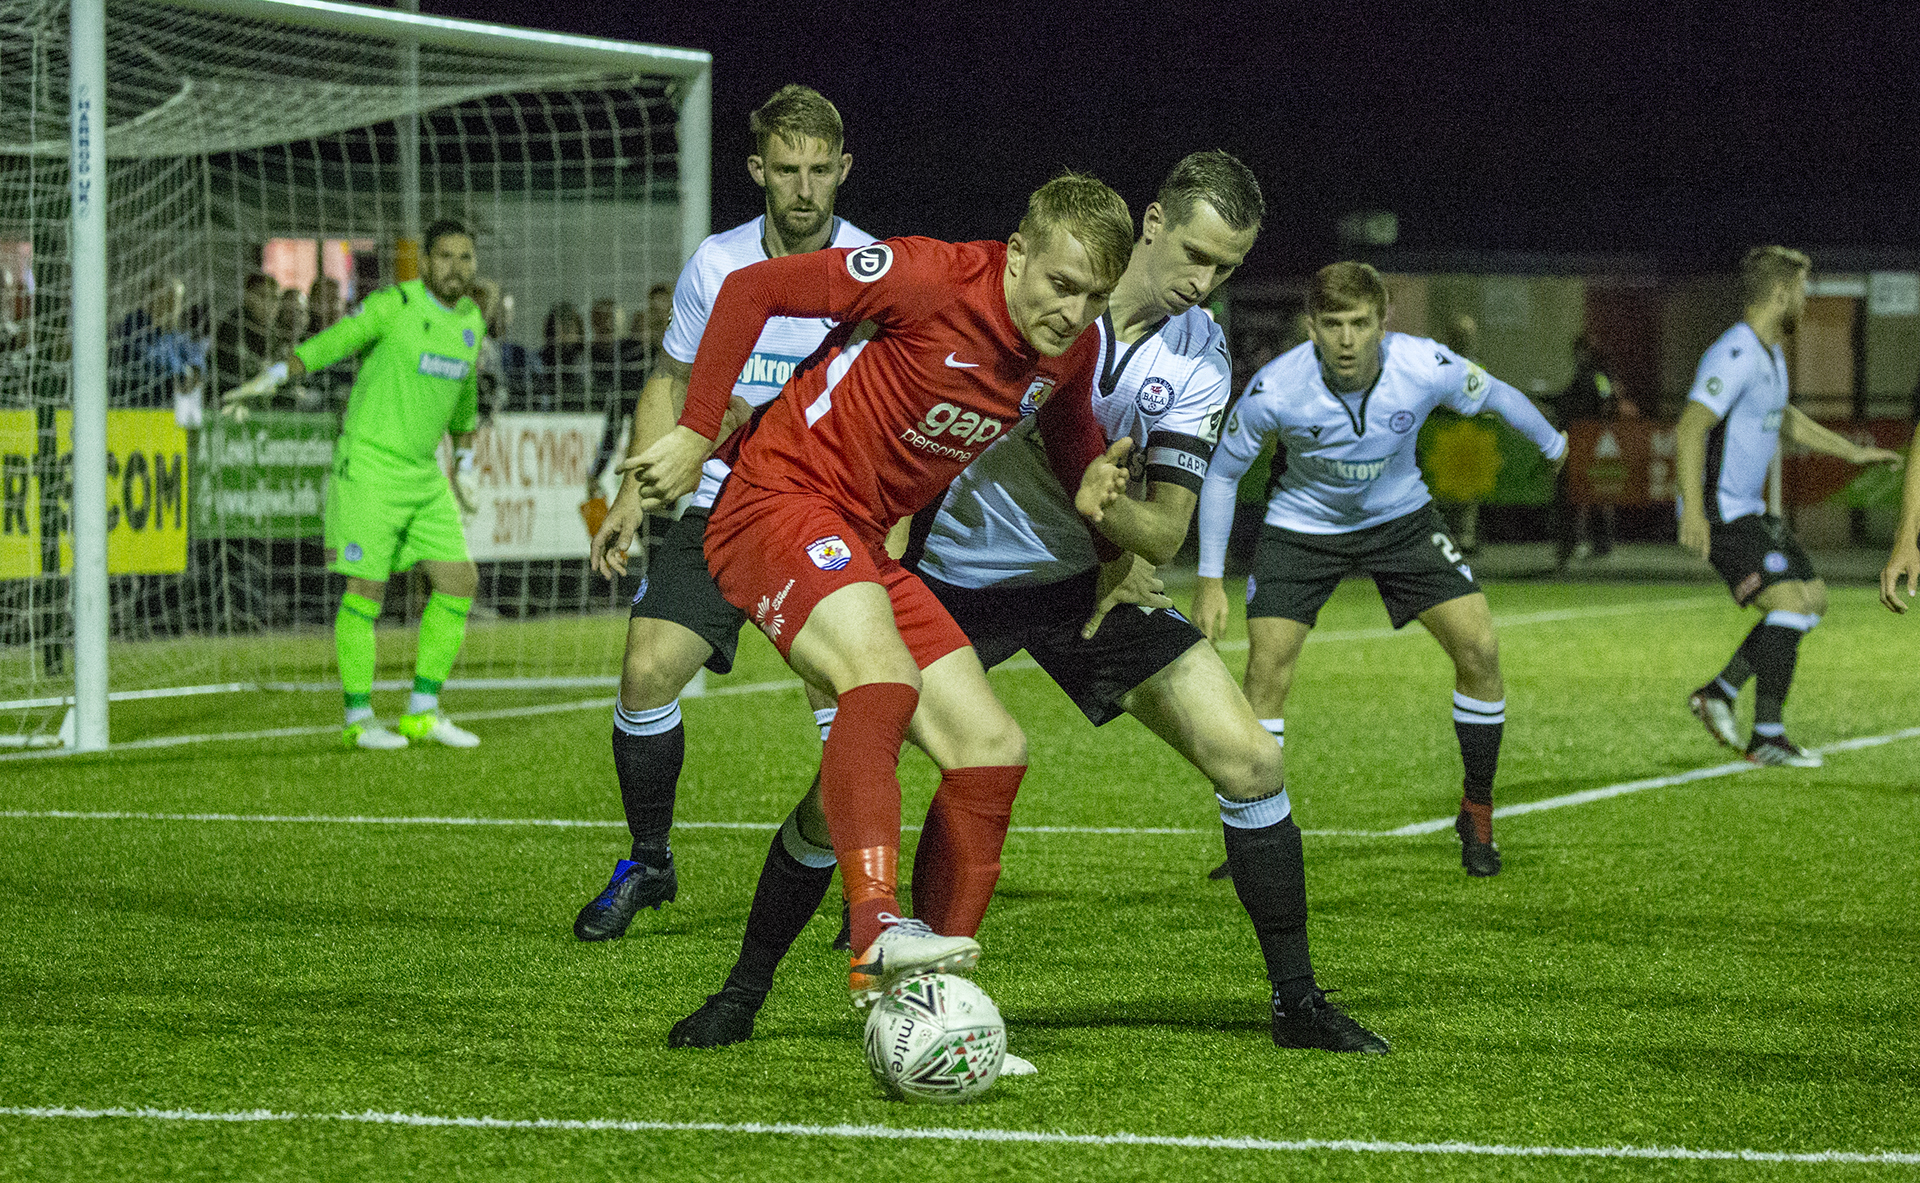 John Disney made his 100th start in all competitions for The Nomads | © NCM Media